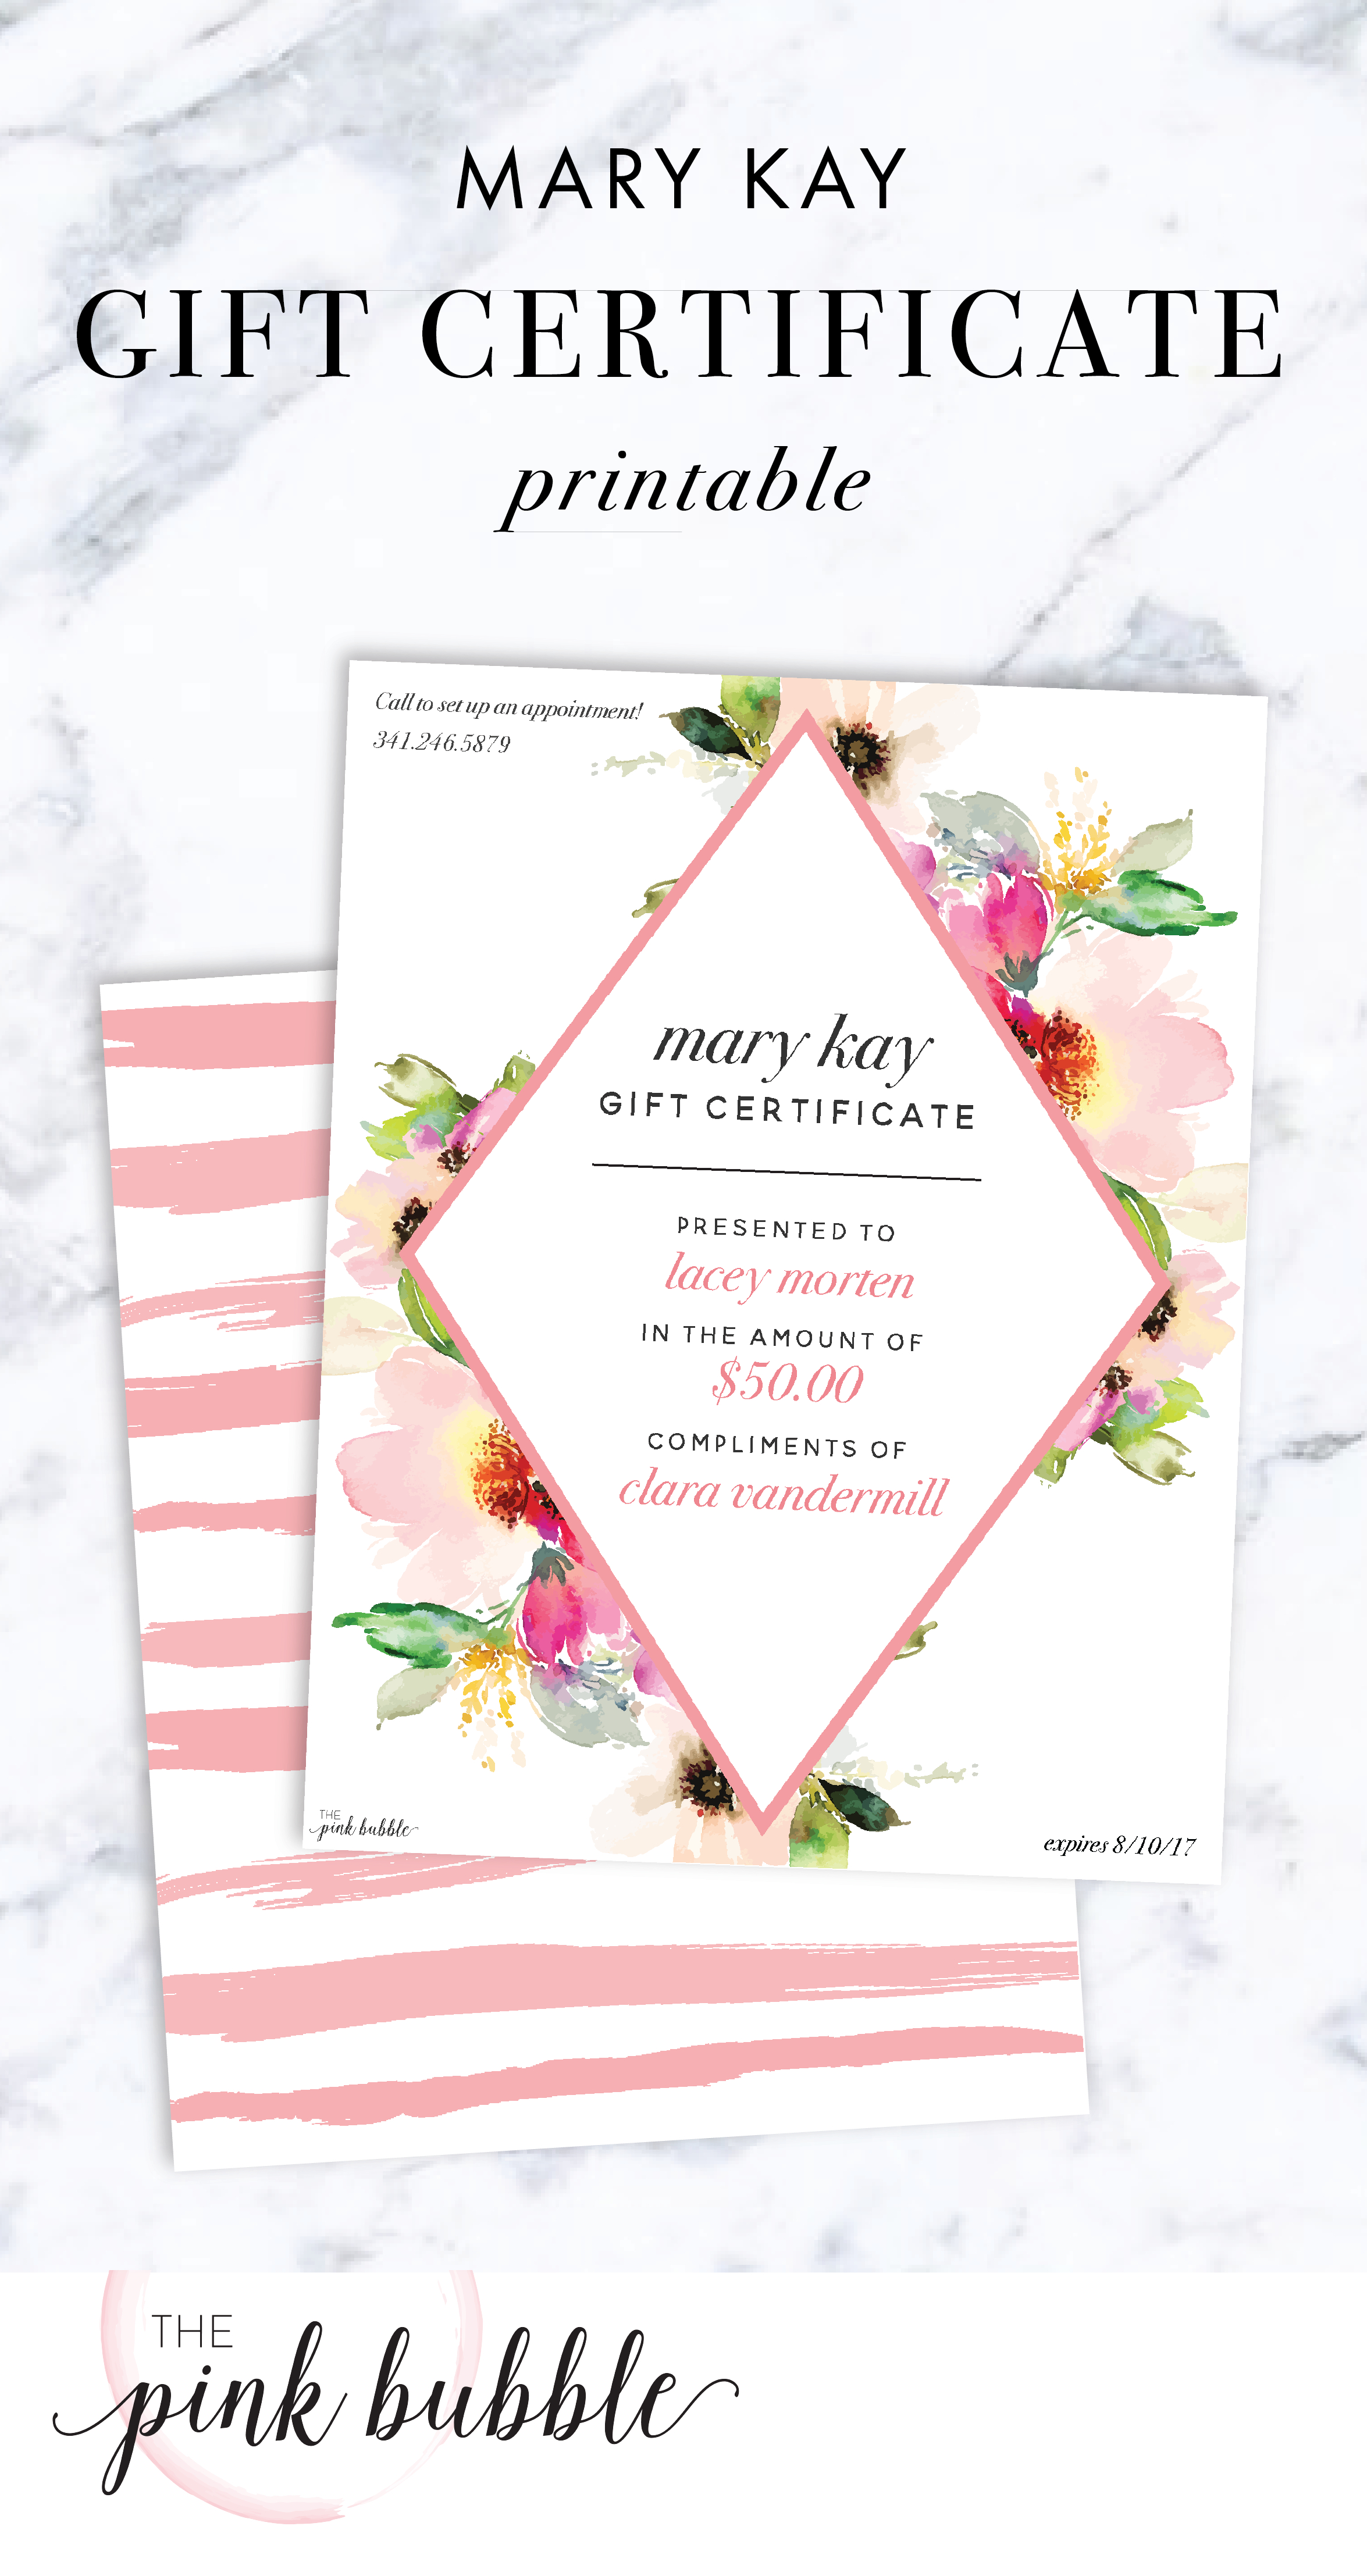 Mary Kay Gift Certificate! Find It Only At Www.thepinkbubble Inside Mary Kay Gift Certificate Template